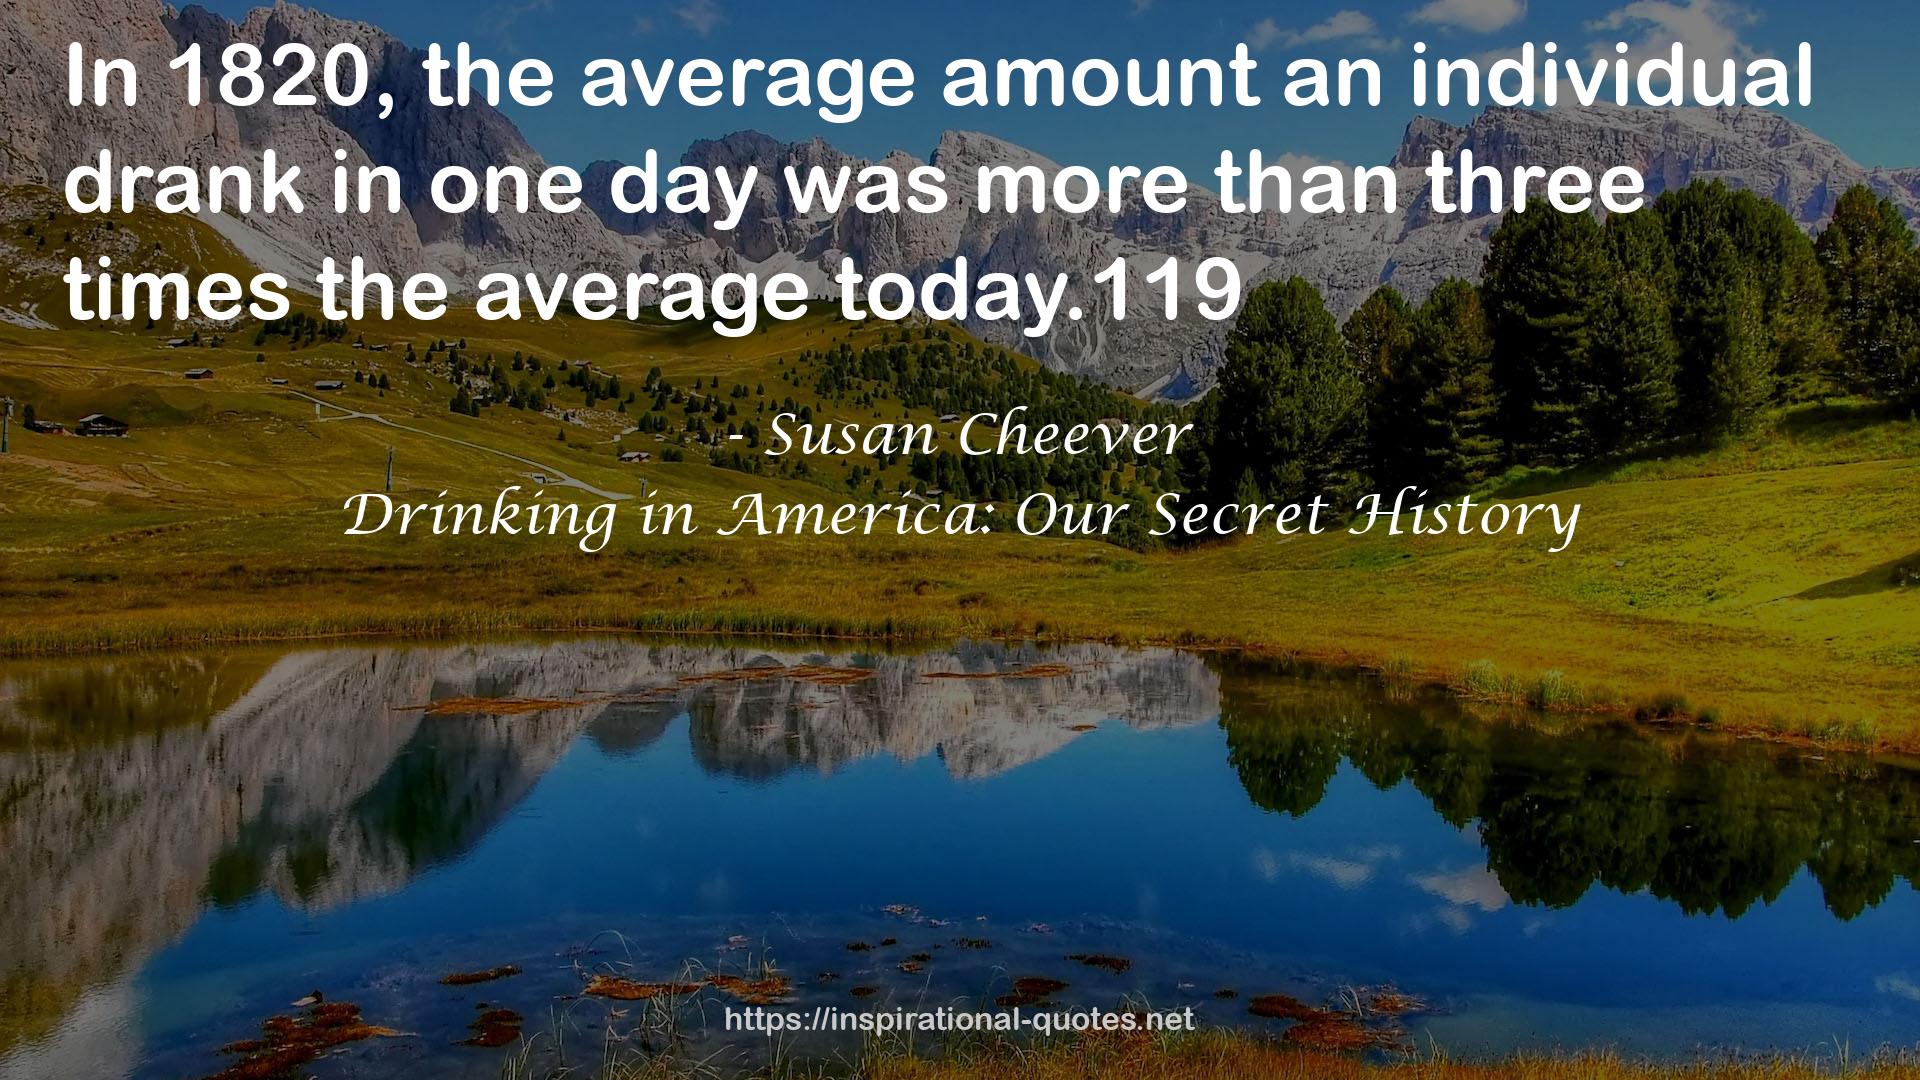 Susan Cheever QUOTES